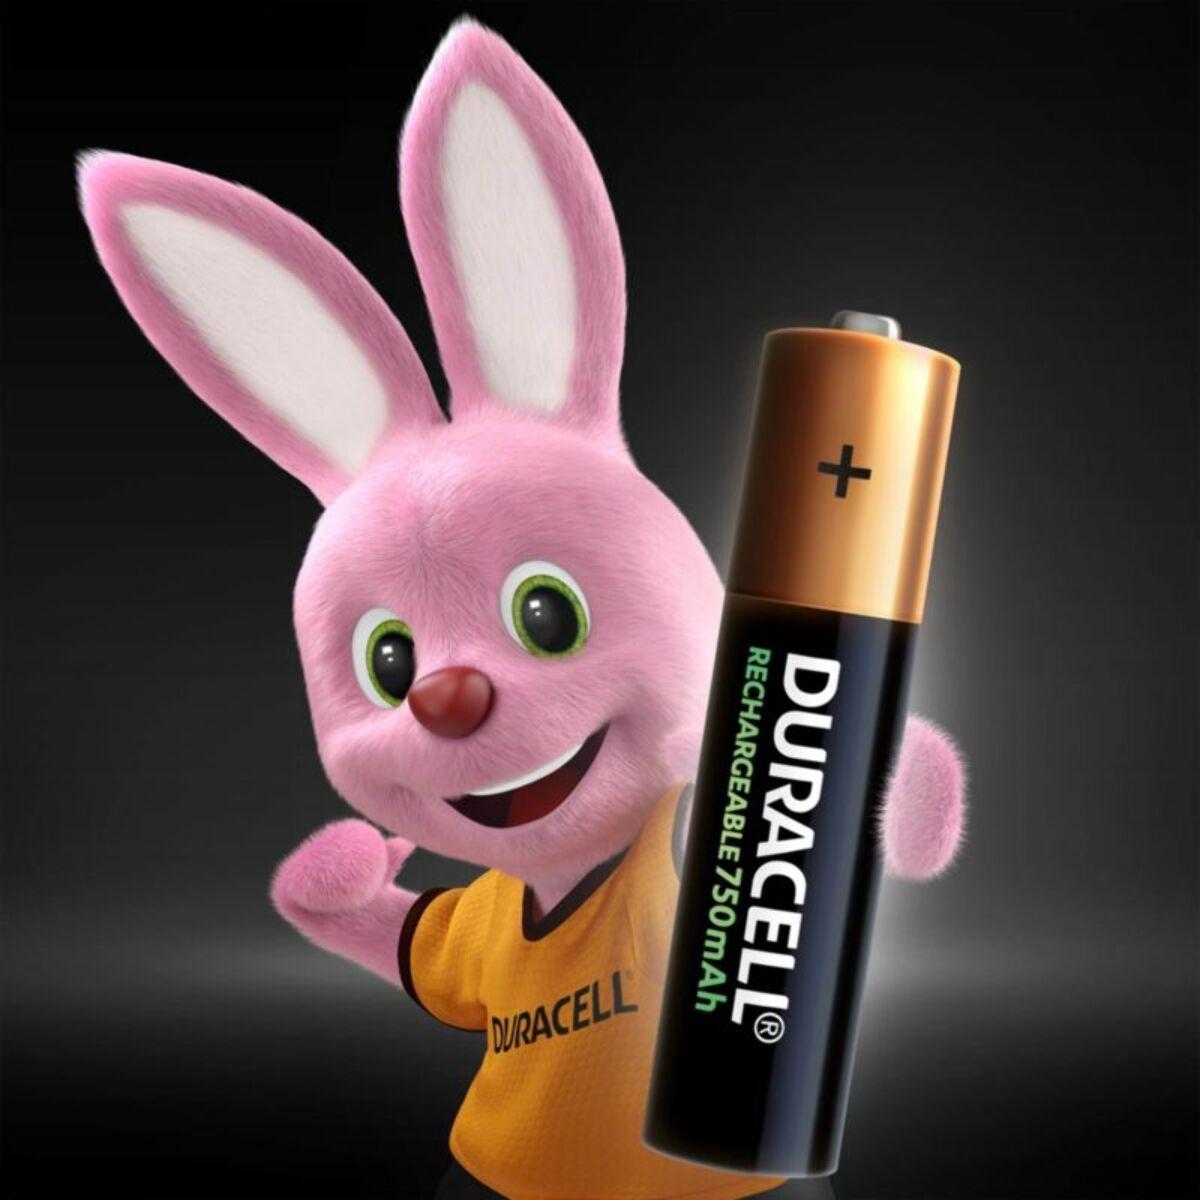 Pile rechargeable DURACELL AA/LR6 ULTRA POWER 2500 mAh, x4